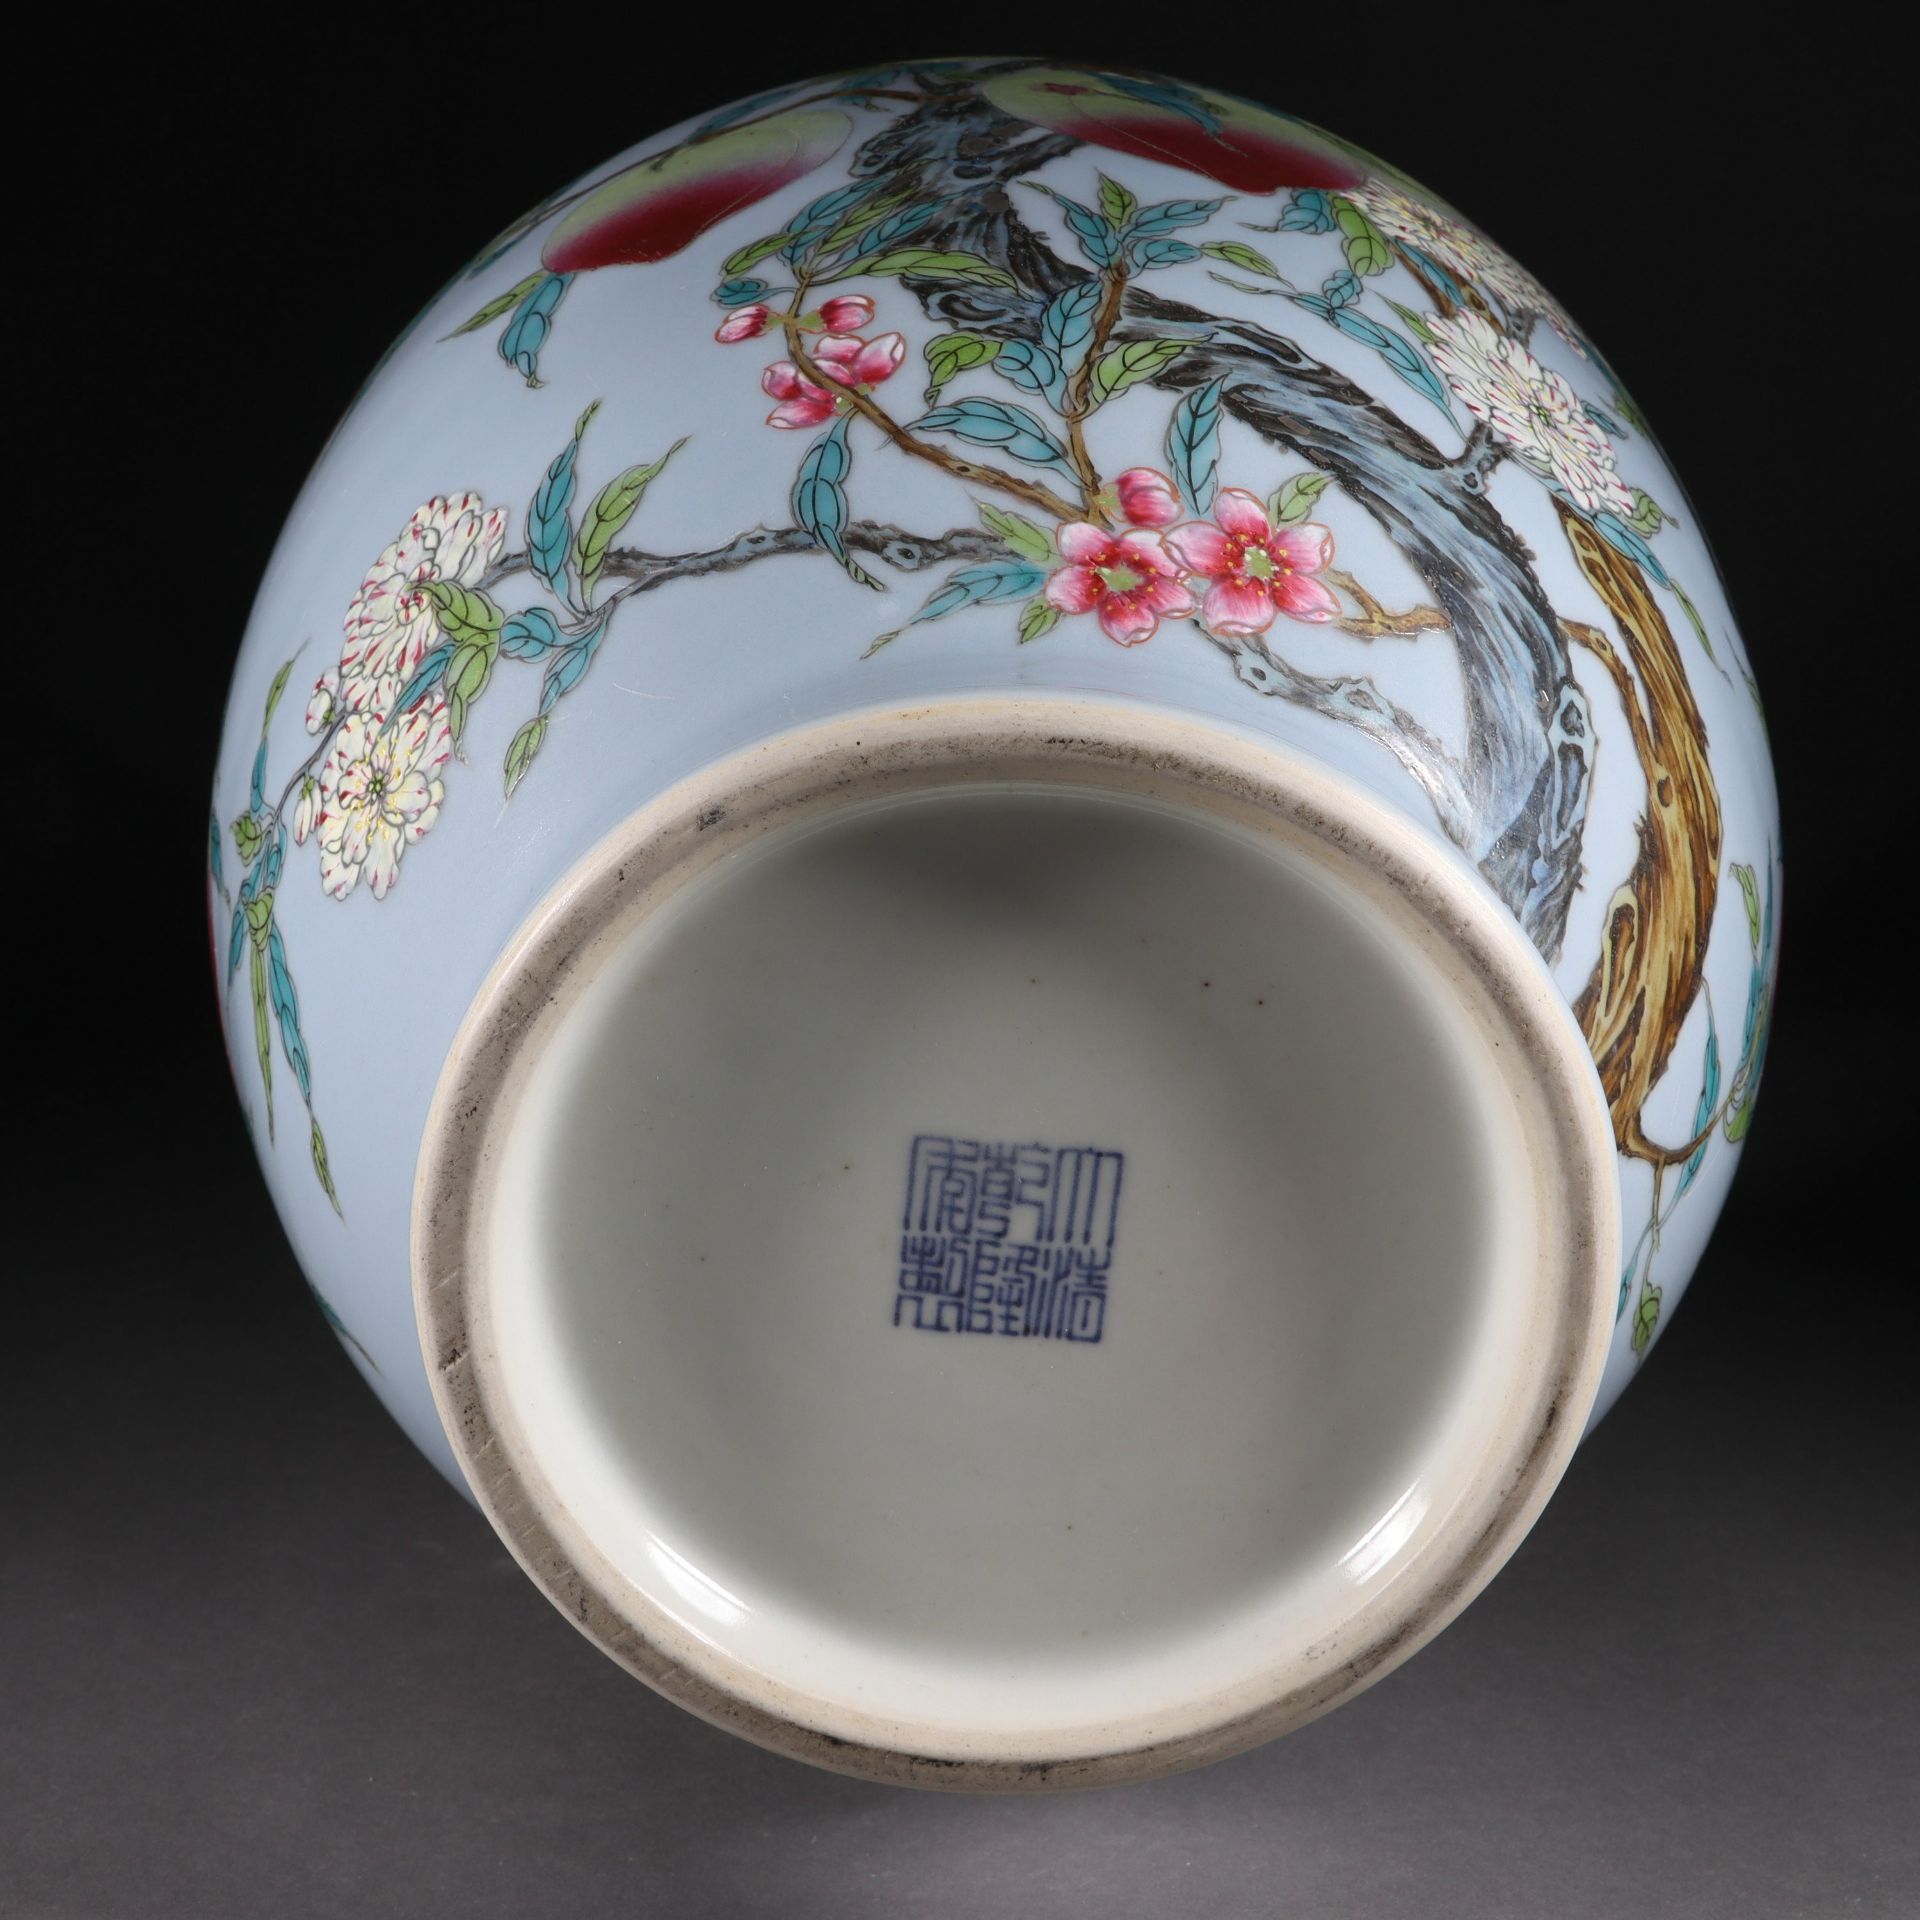 Pastel nine peach amphora from the Qing dynasty - Image 9 of 9